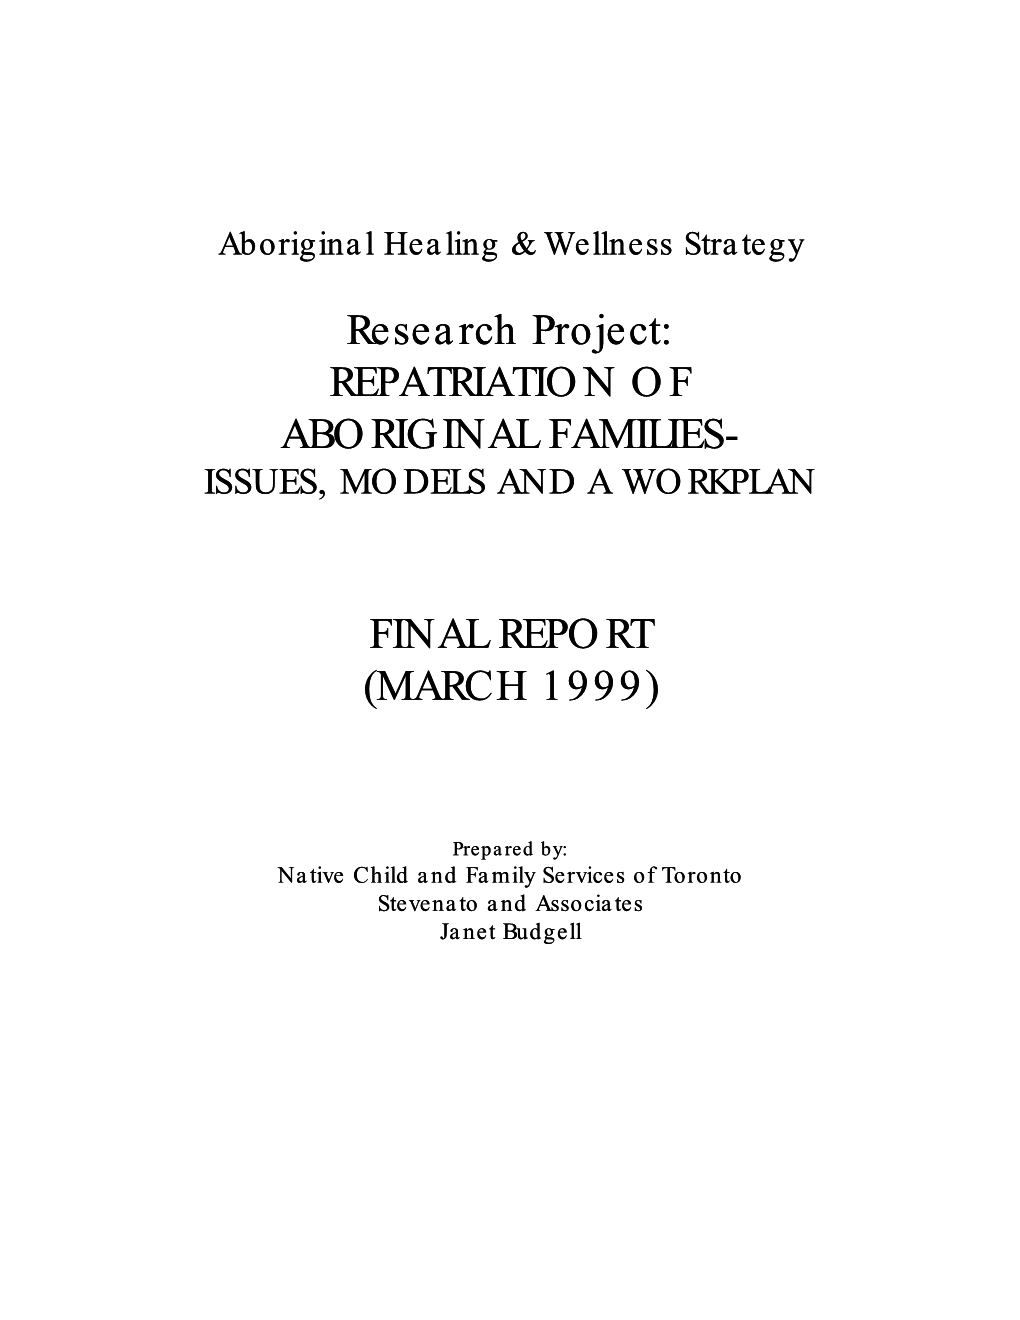 Repatriation of Aboriginal Families- Issues, Models and a Workplan